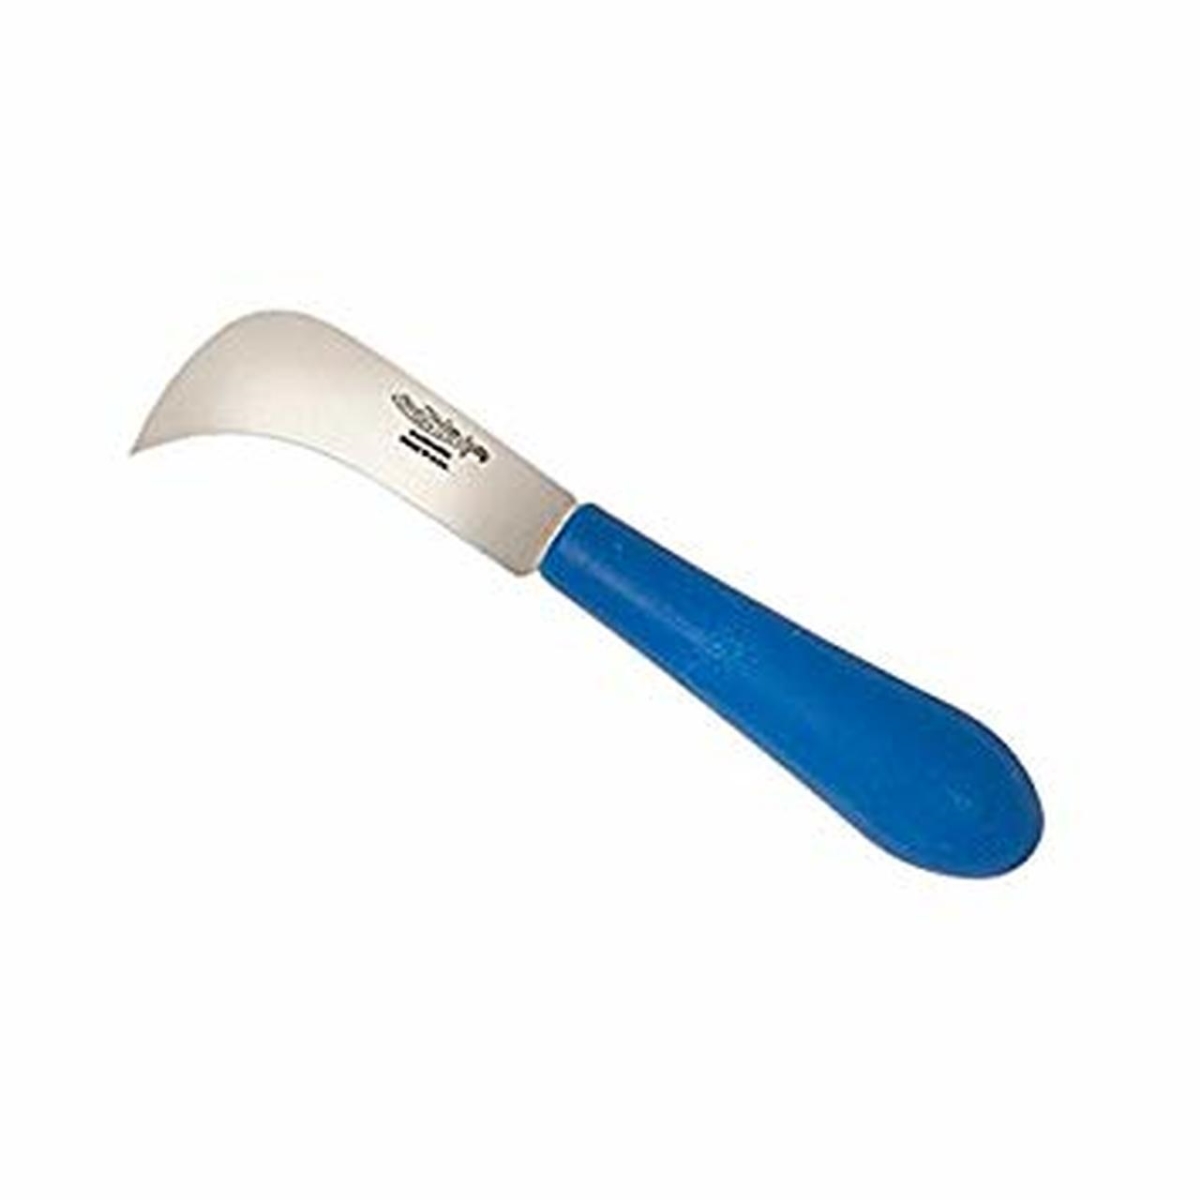 Ont-4200ss 2019 45-3 Linoleum Knife With Stainless & Plastic Handle - 0.5 In.